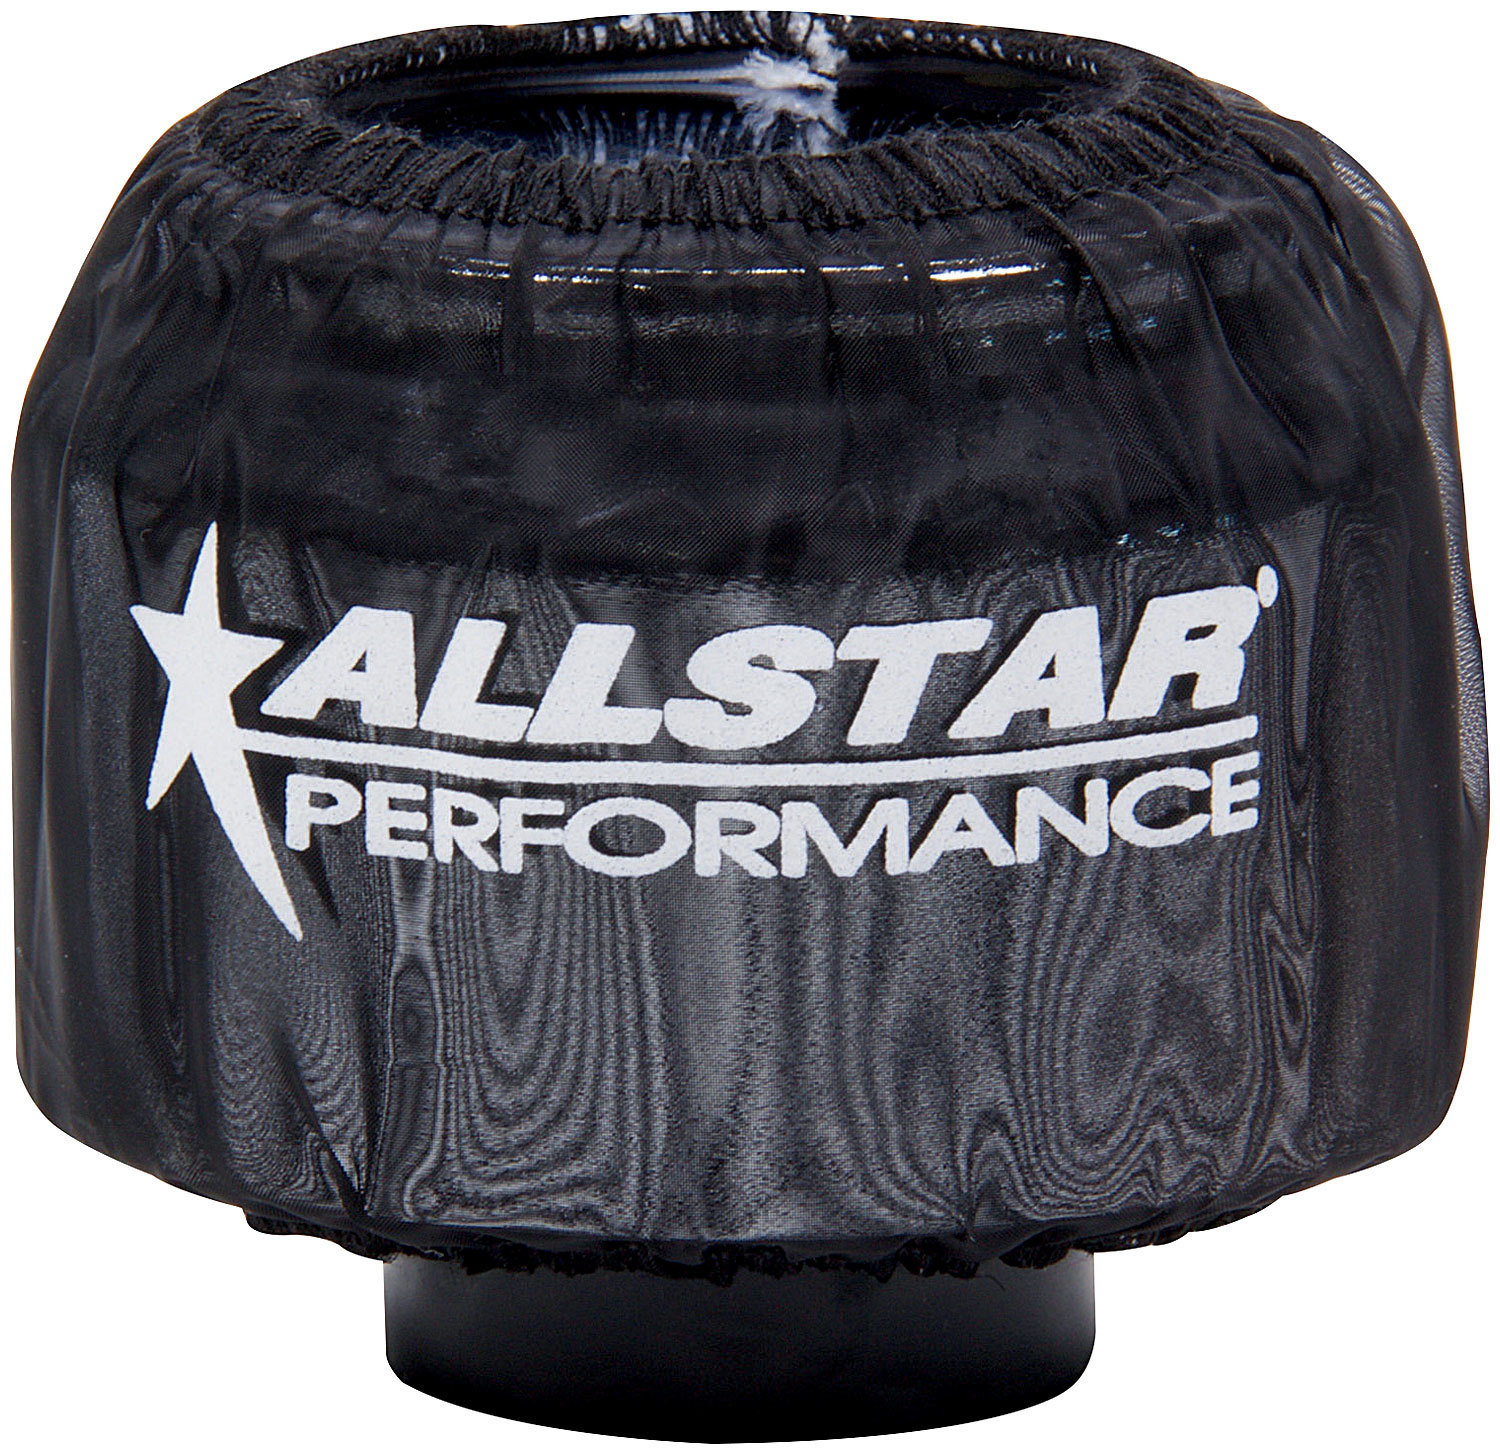 Breather Wrap - Pre Filter - 3 in OD - 2-1/2 in Tall - Allstar Logo - Polyester - Black - Shielded Breathers - Each